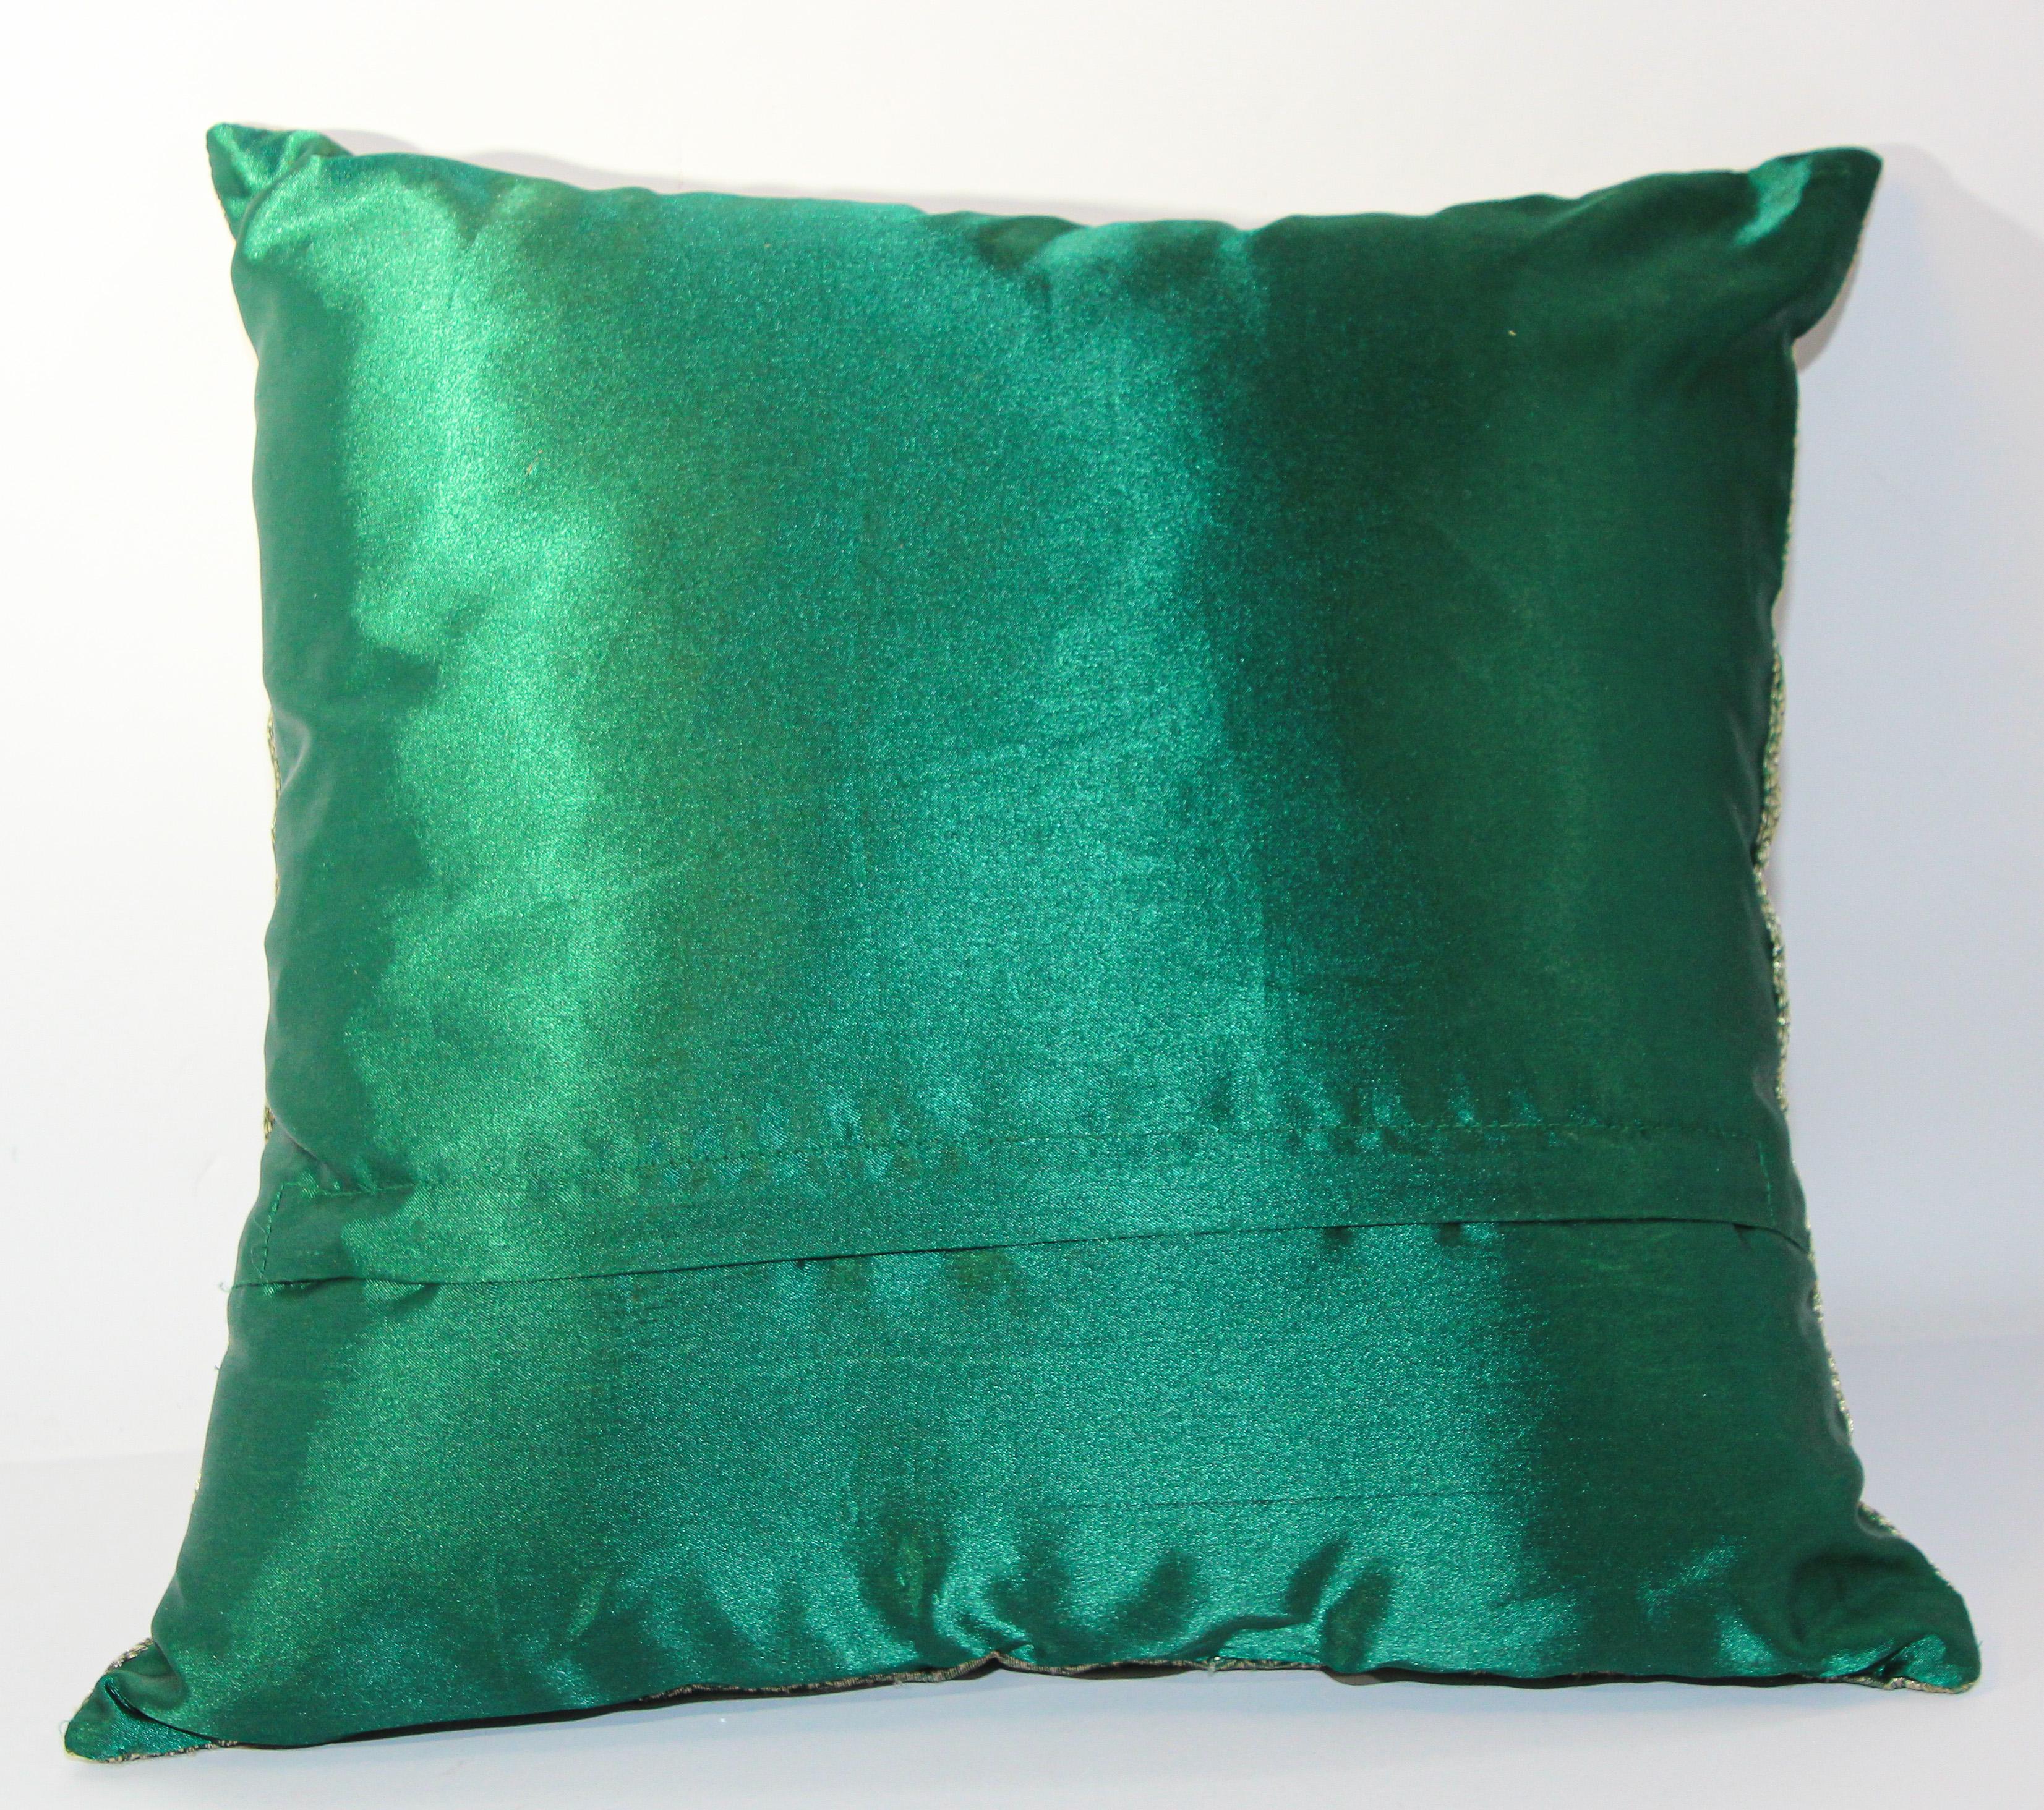 Emerald Green Moorish Pillow Embellished with Sequins and Beads For Sale 3